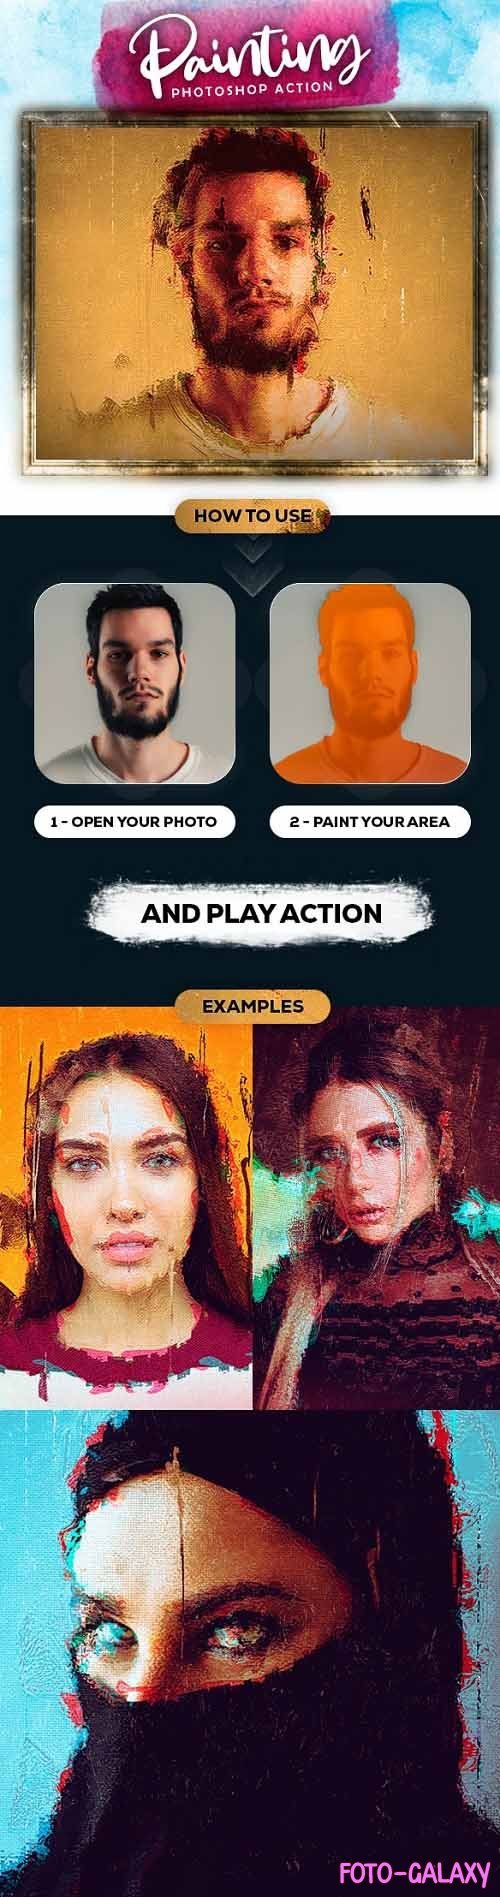 Painting Photoshop Action - 33944584